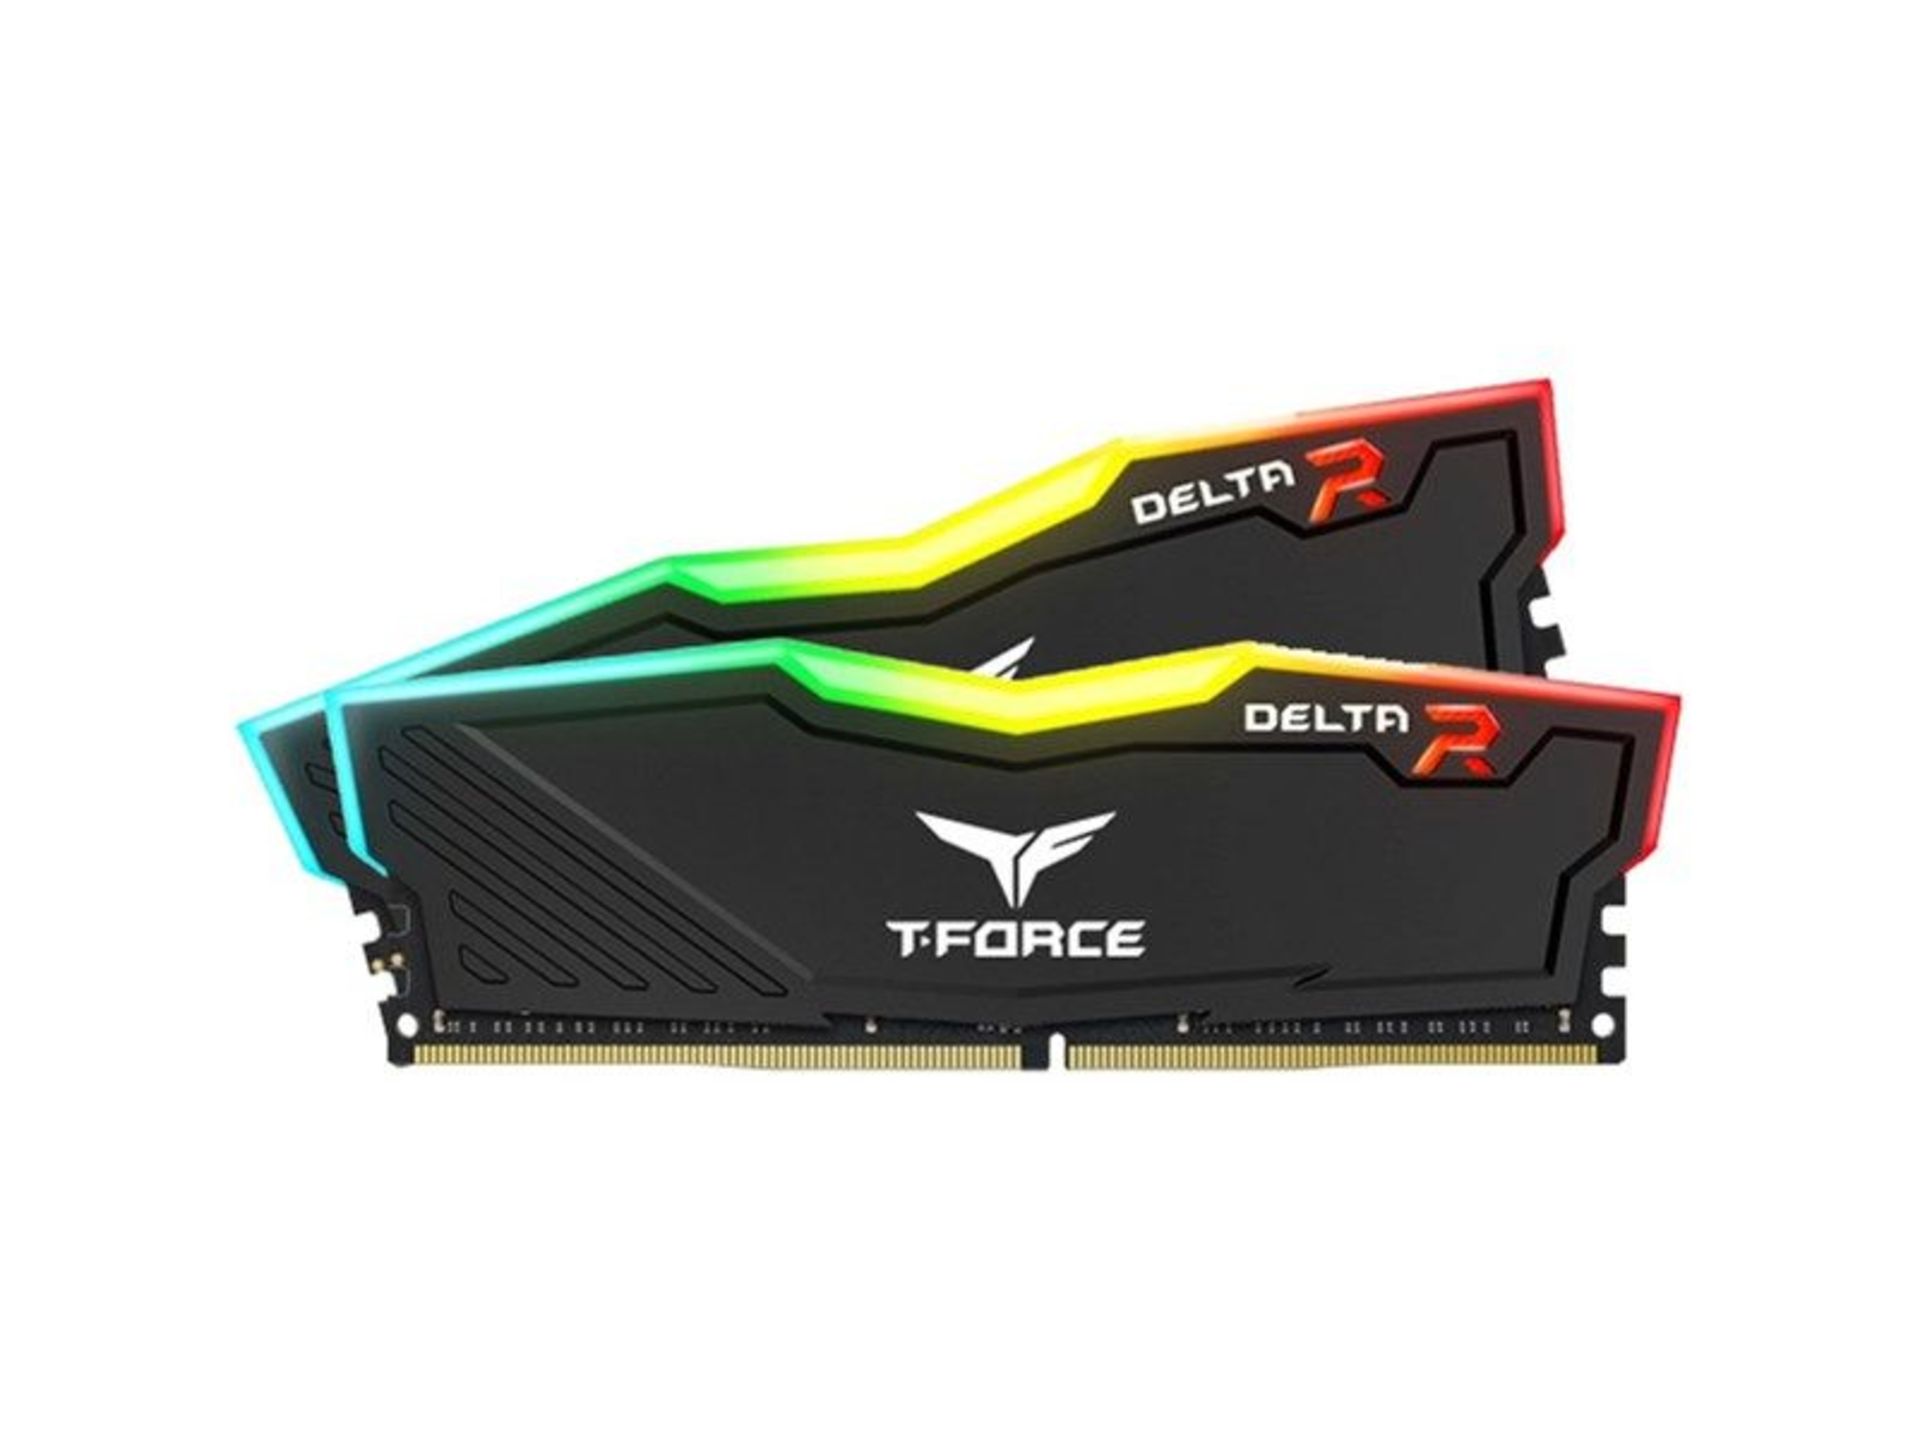 TEAMGROUP T-Force Delta RGB 32GB (2x16GB) 3600MHz DDR4 Memory Kit. - P1. RRP £150.00.